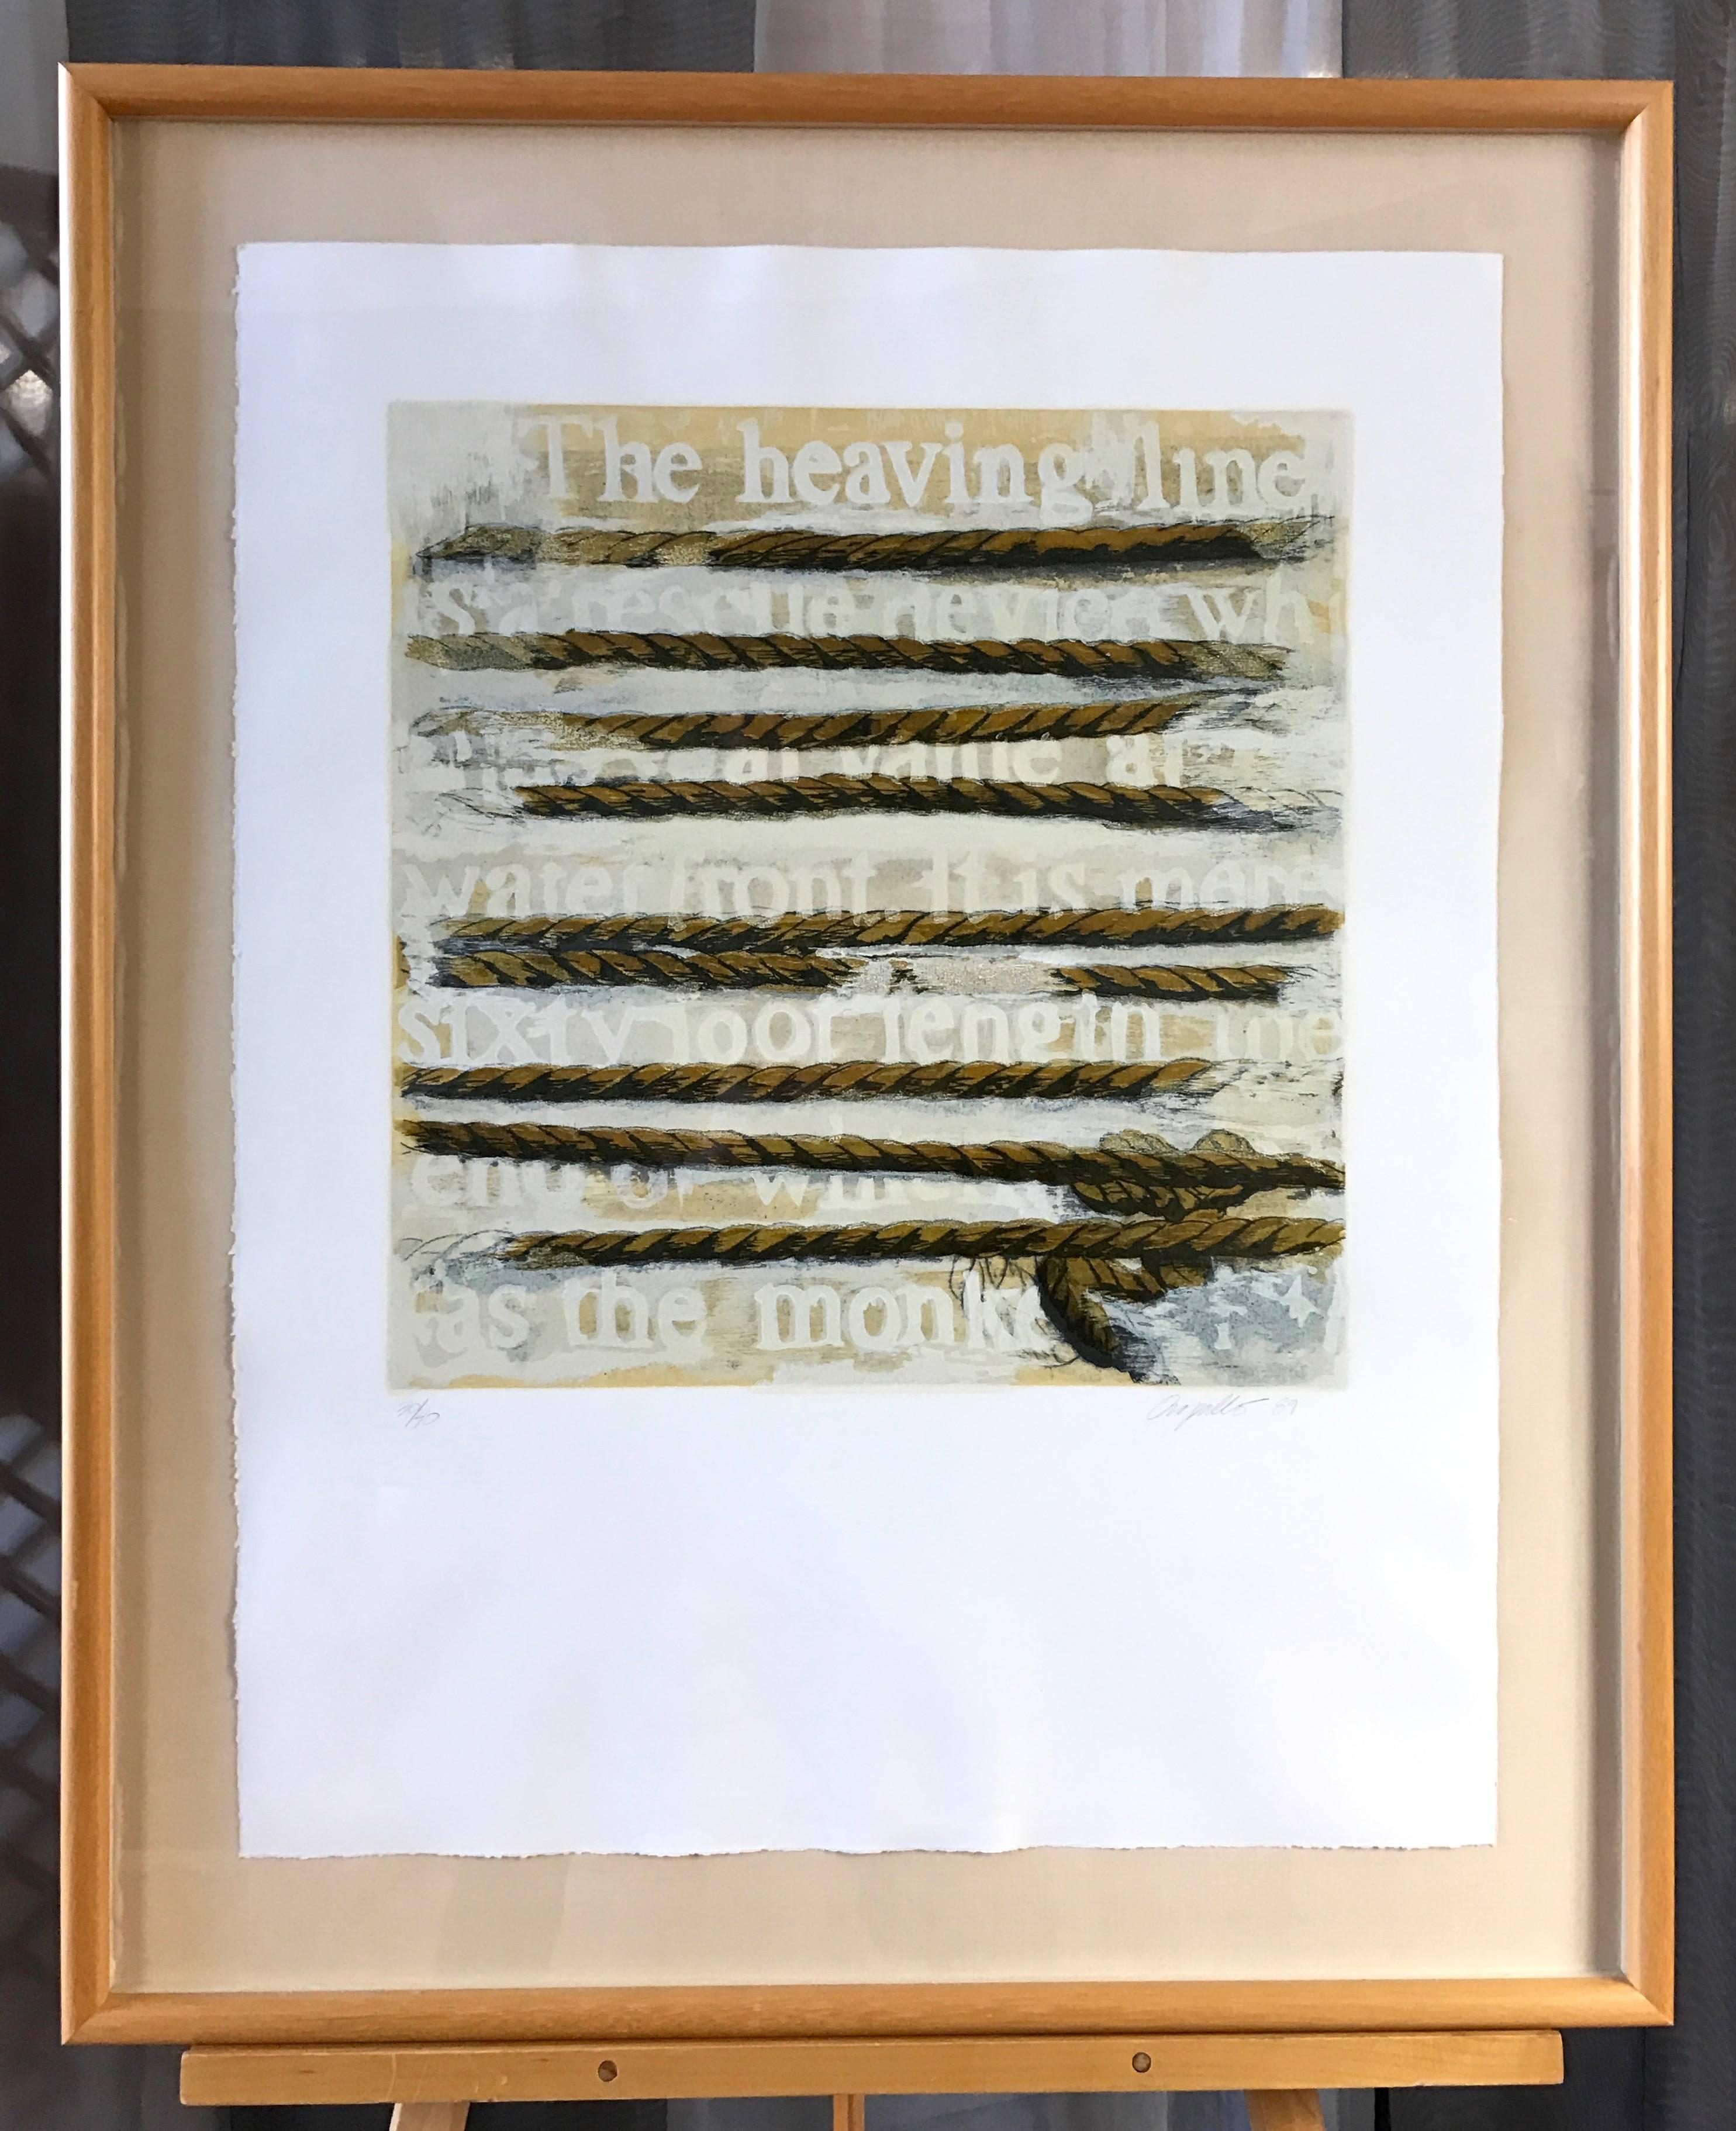 A multi-technique woodcut on paper titled “Rescue Device” by American artist Deborah Oropallo (b. 1954). Crisply-rendered depiction of a tautly wound heaving line is interspersed with ghostly text that offers a fragmented definition of the same.